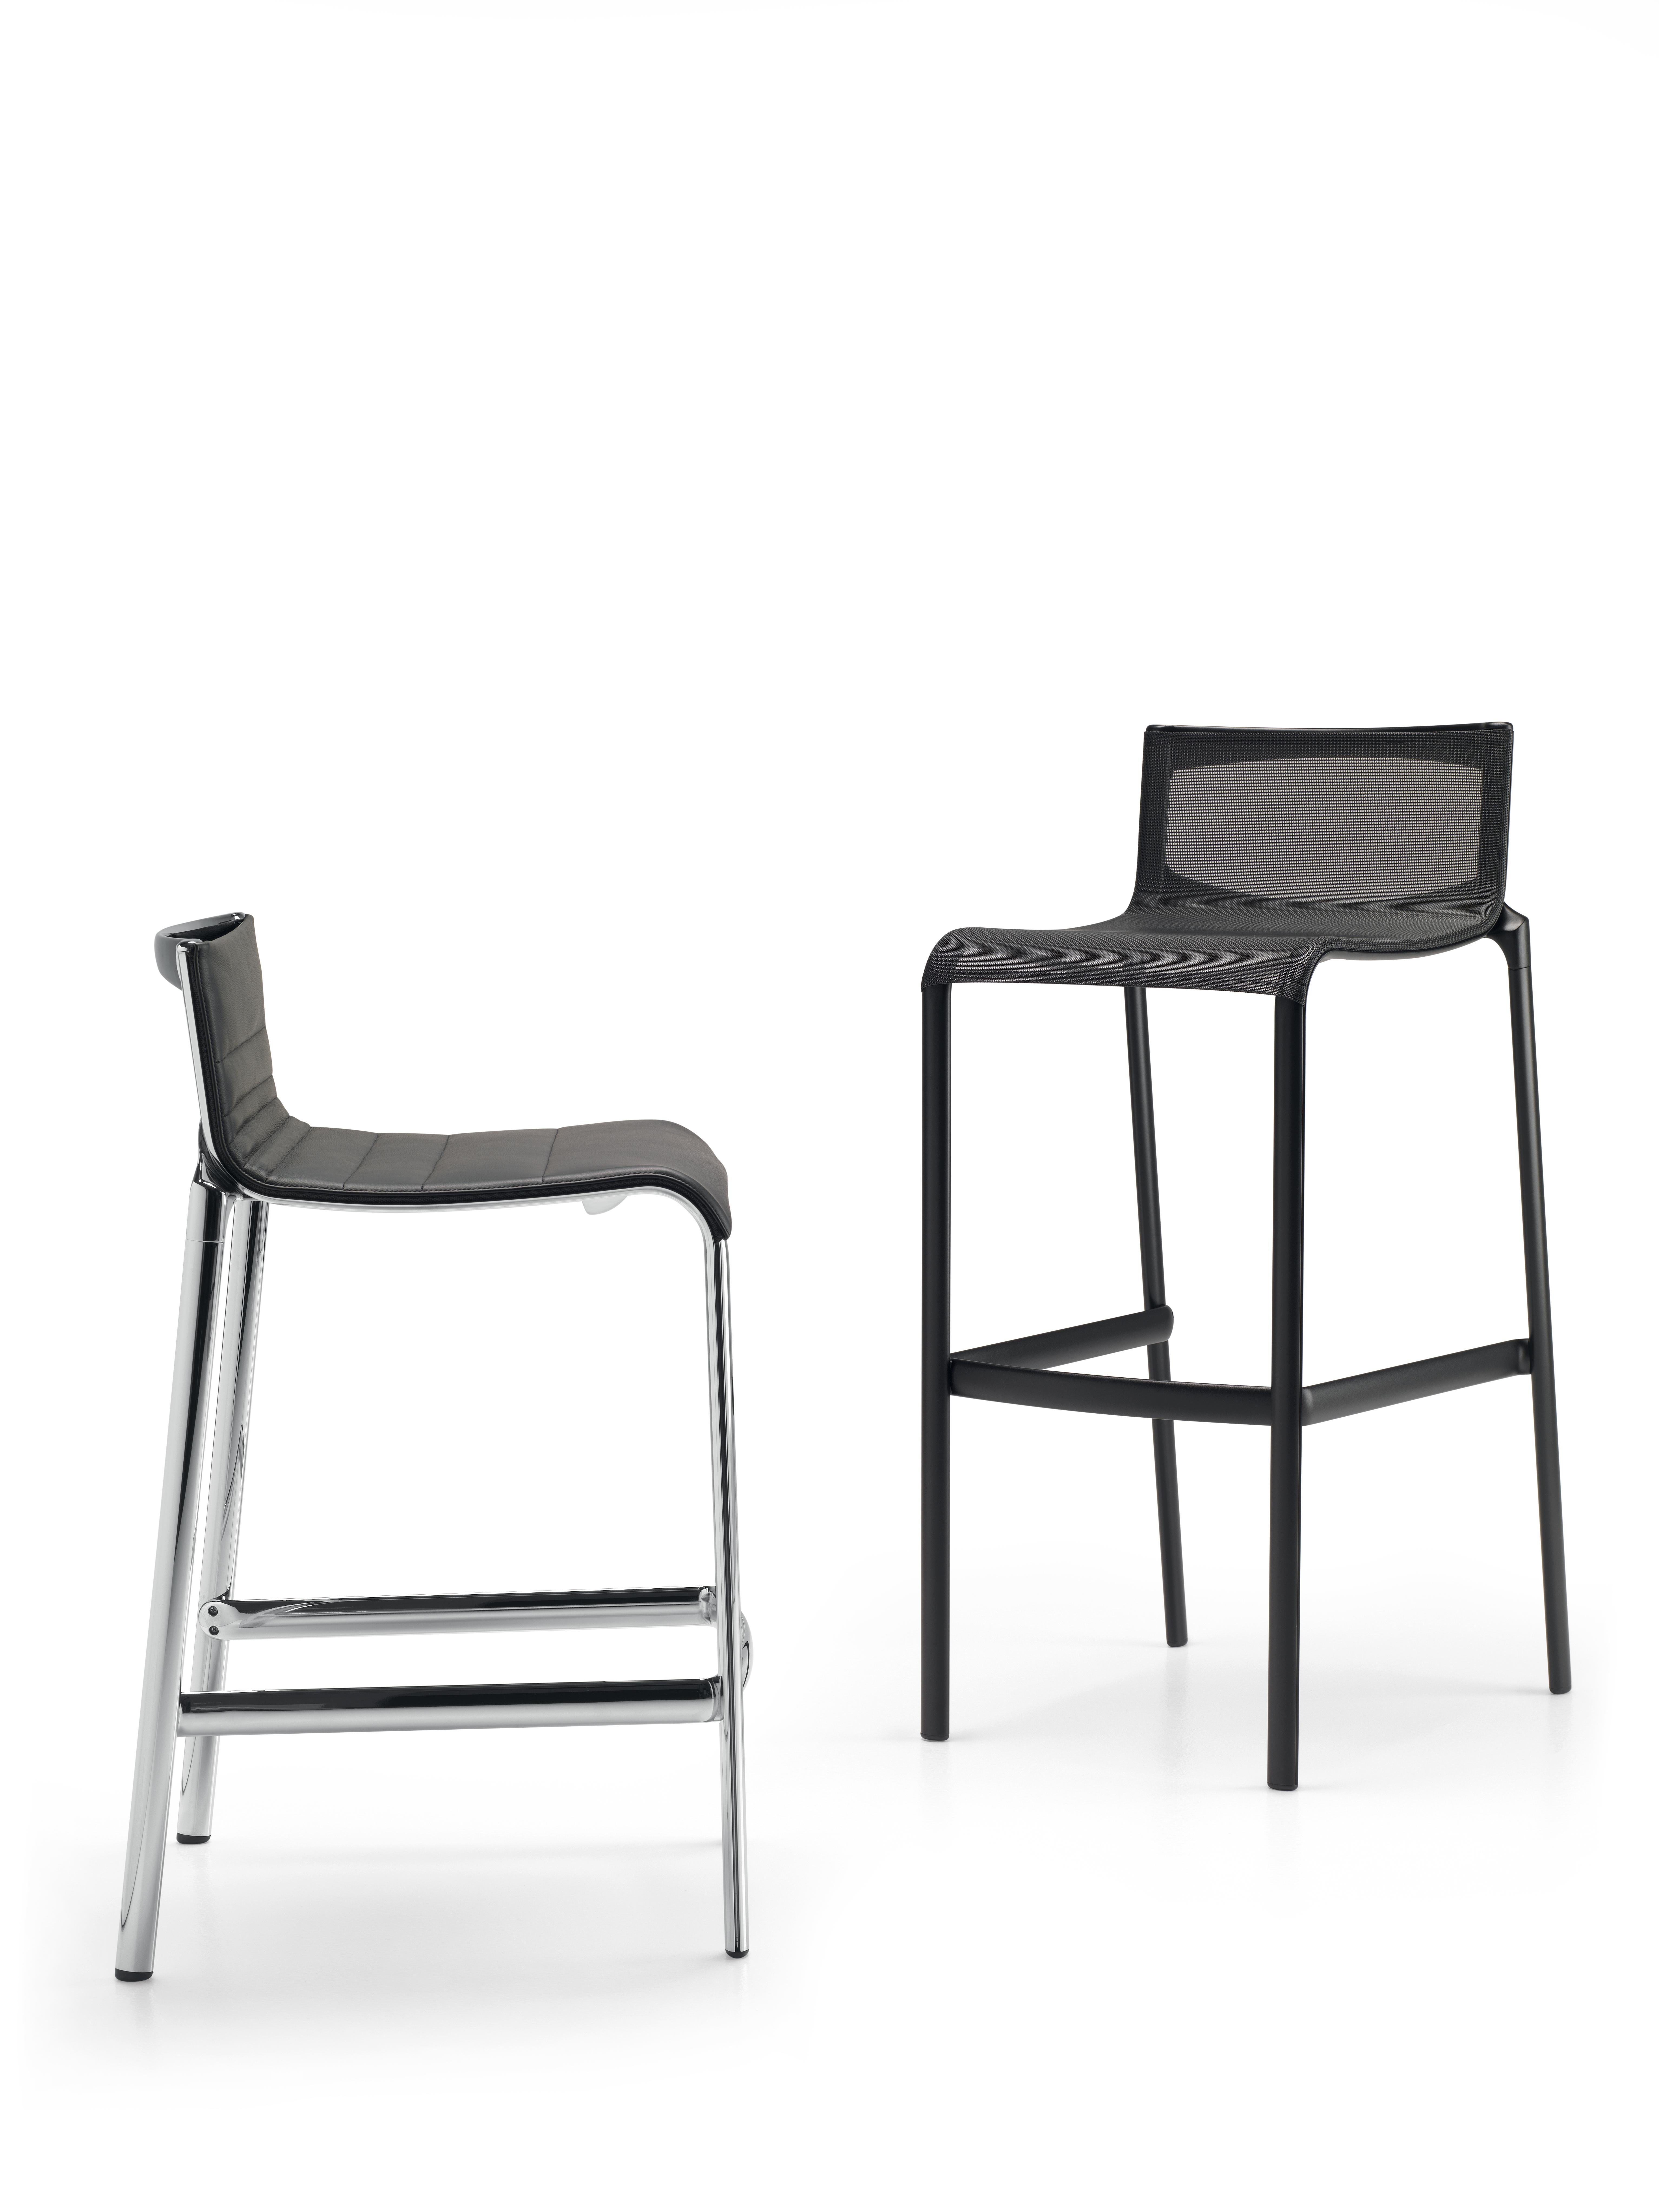 Alias Frame 41B High Stool in Black Upholstery with Chromed Aluminium Frame by Alberto Meda

Stool with structure composed of extruded aluminium profile and die-cast aluminium elements. Seat and back in fire retardant PVC covered polyester mesh,